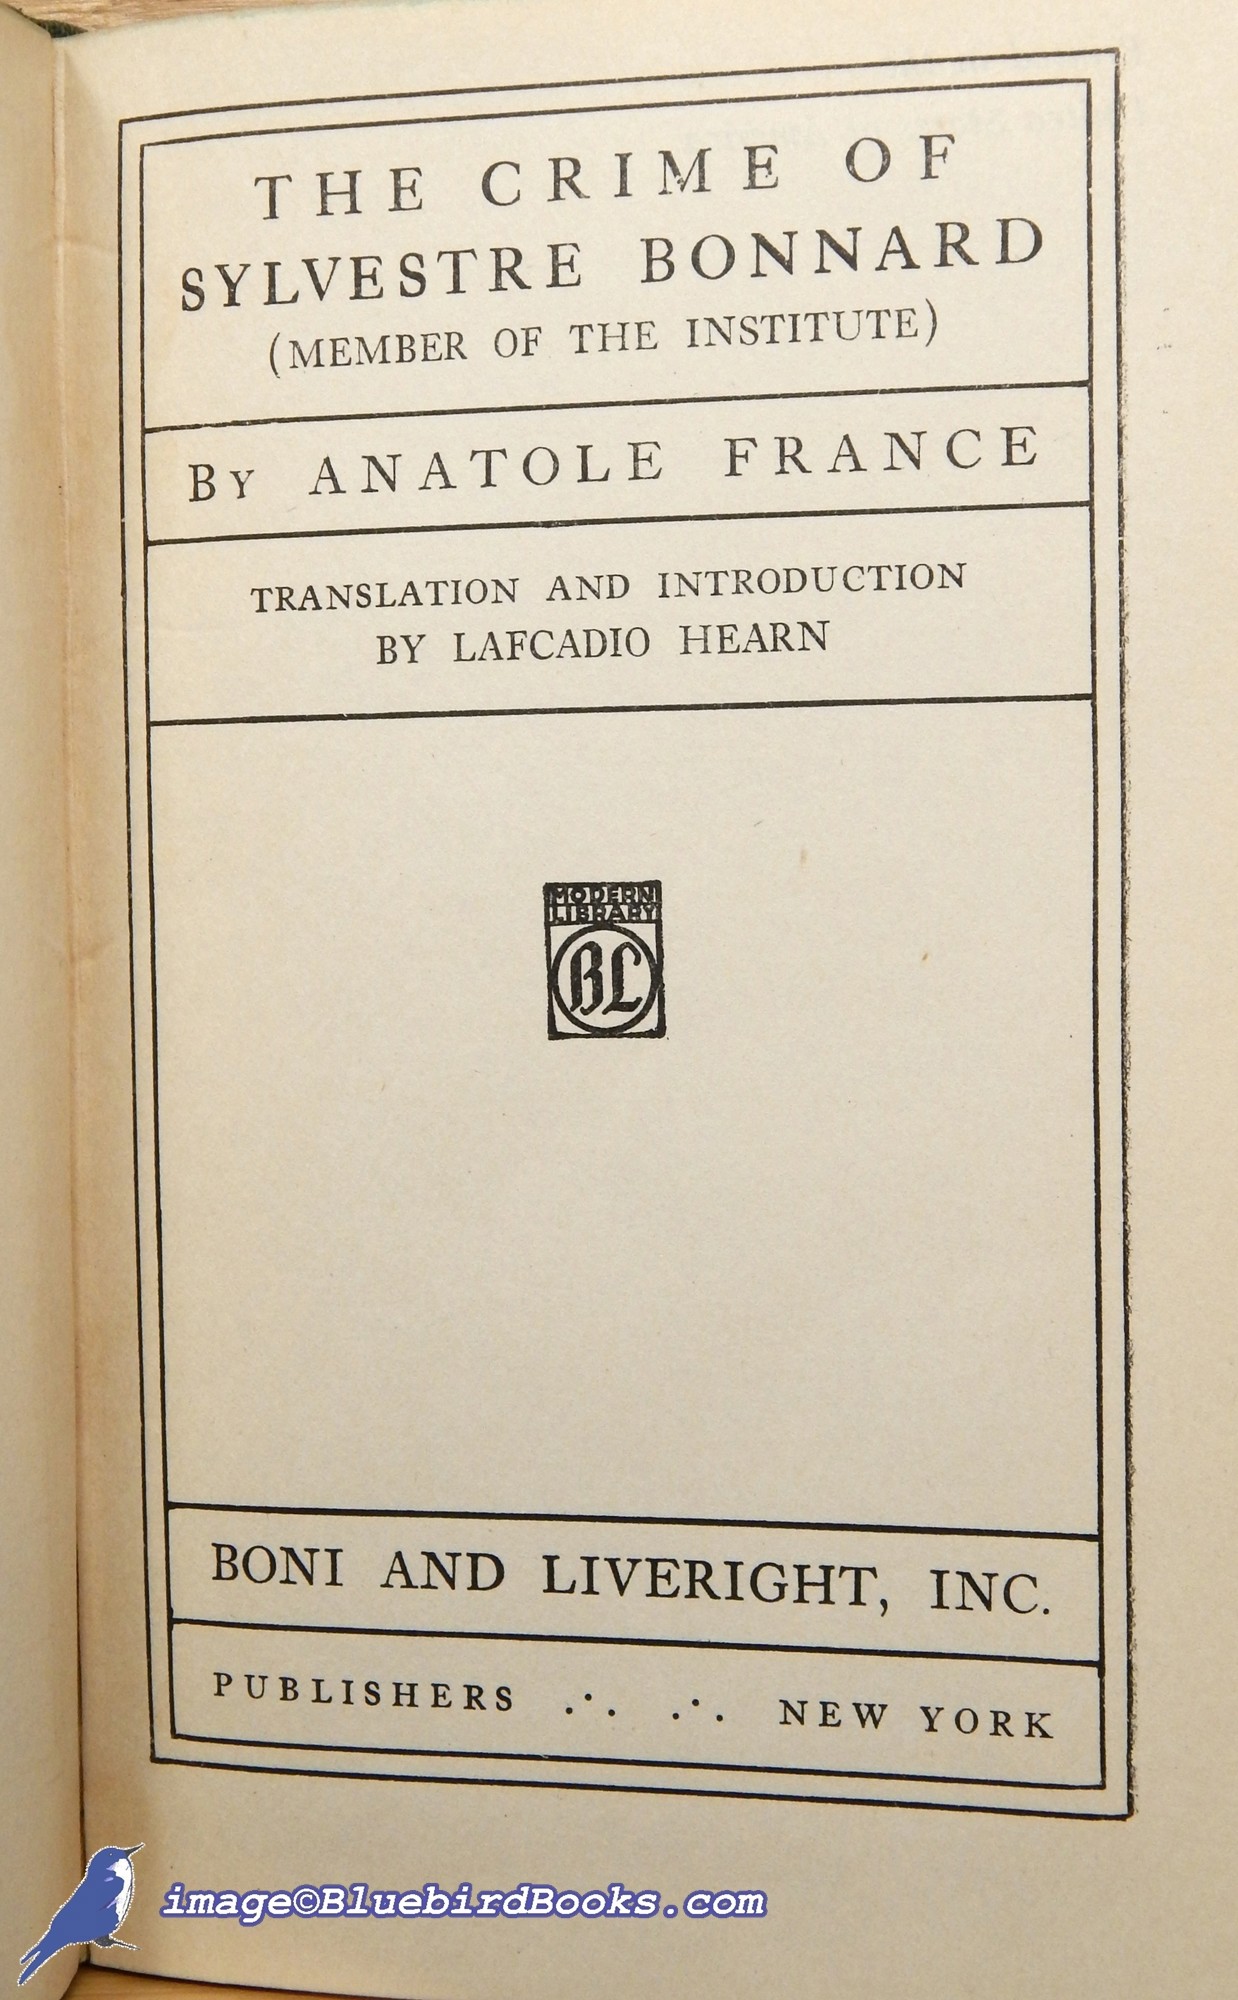 FRANCE, ANATOLE - The Crime of Sylvestre Bonnard (Member of the Institute) Modern Library Spine 2, ML #22. 1